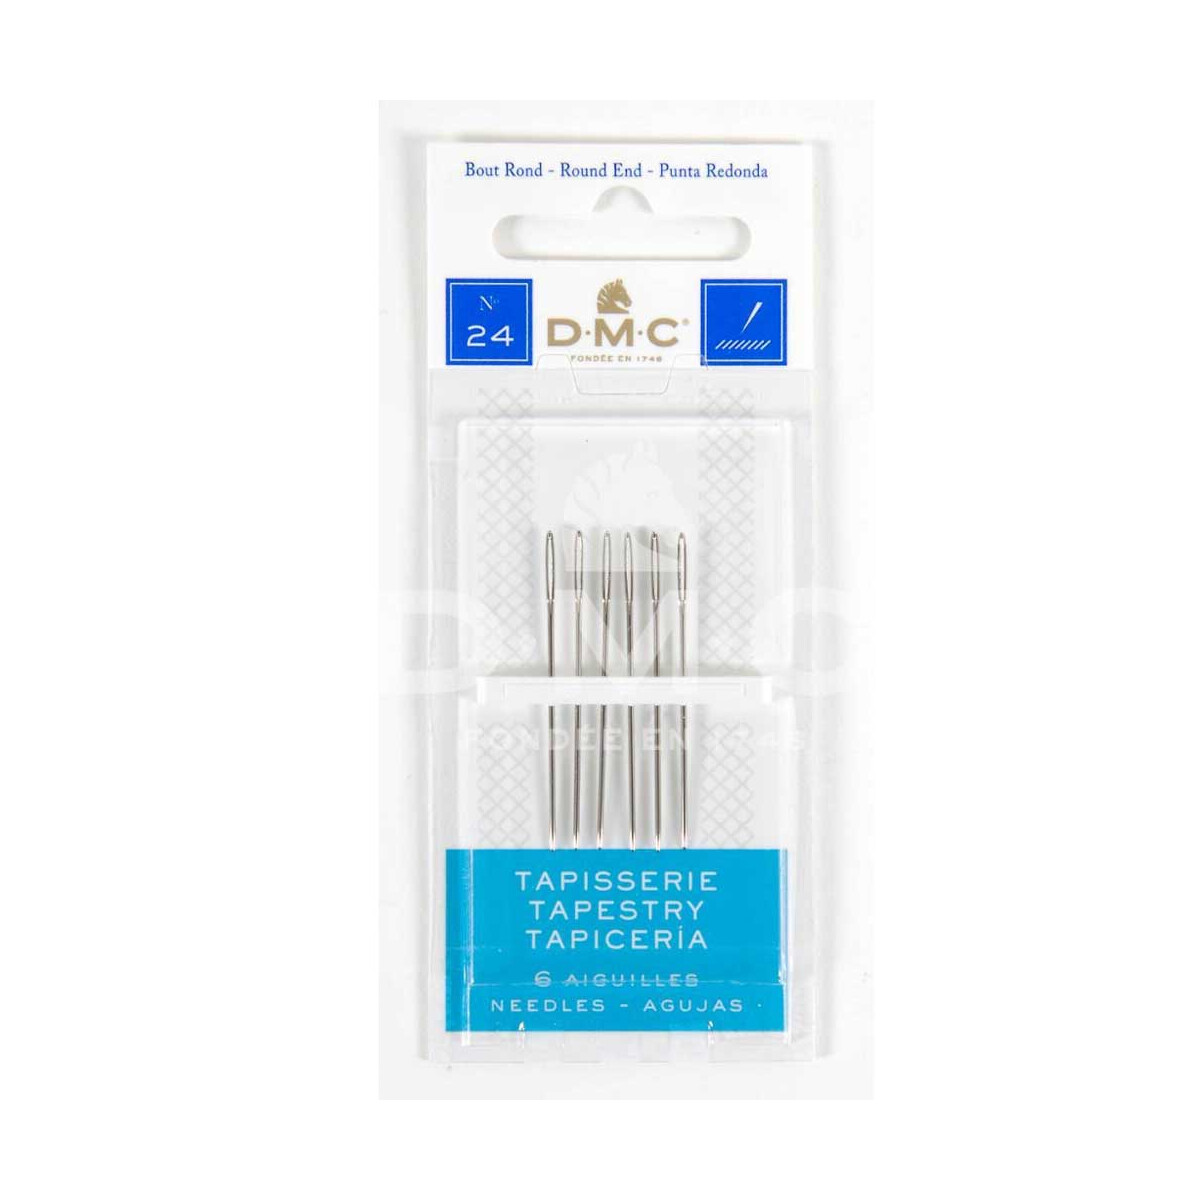 DMC Stitch Needle for Tapestry, rounded end, Size 24, set...